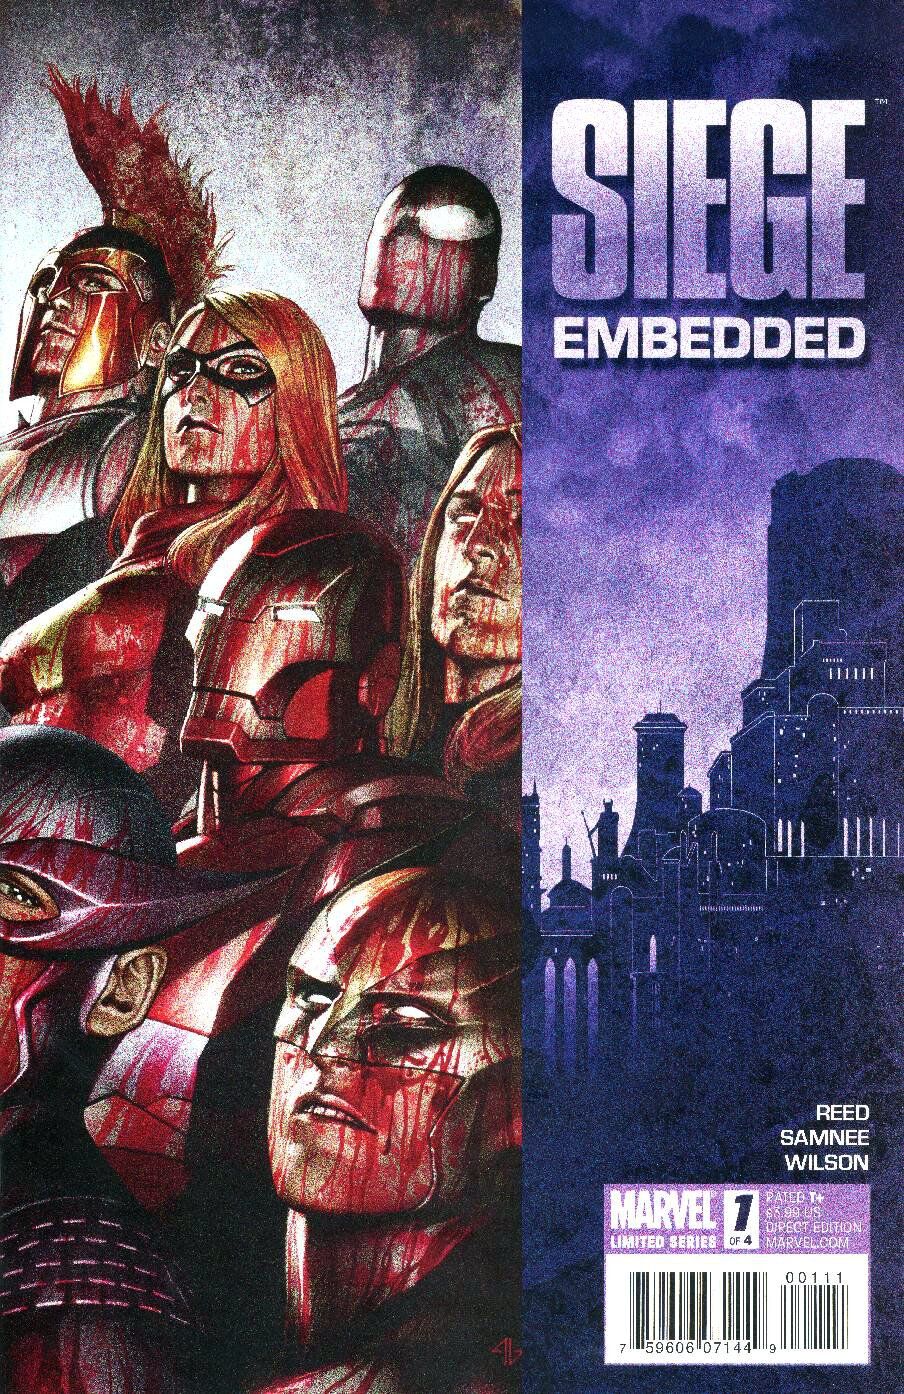 Siege: Embedded Limited Series Bundle Issues 1-4